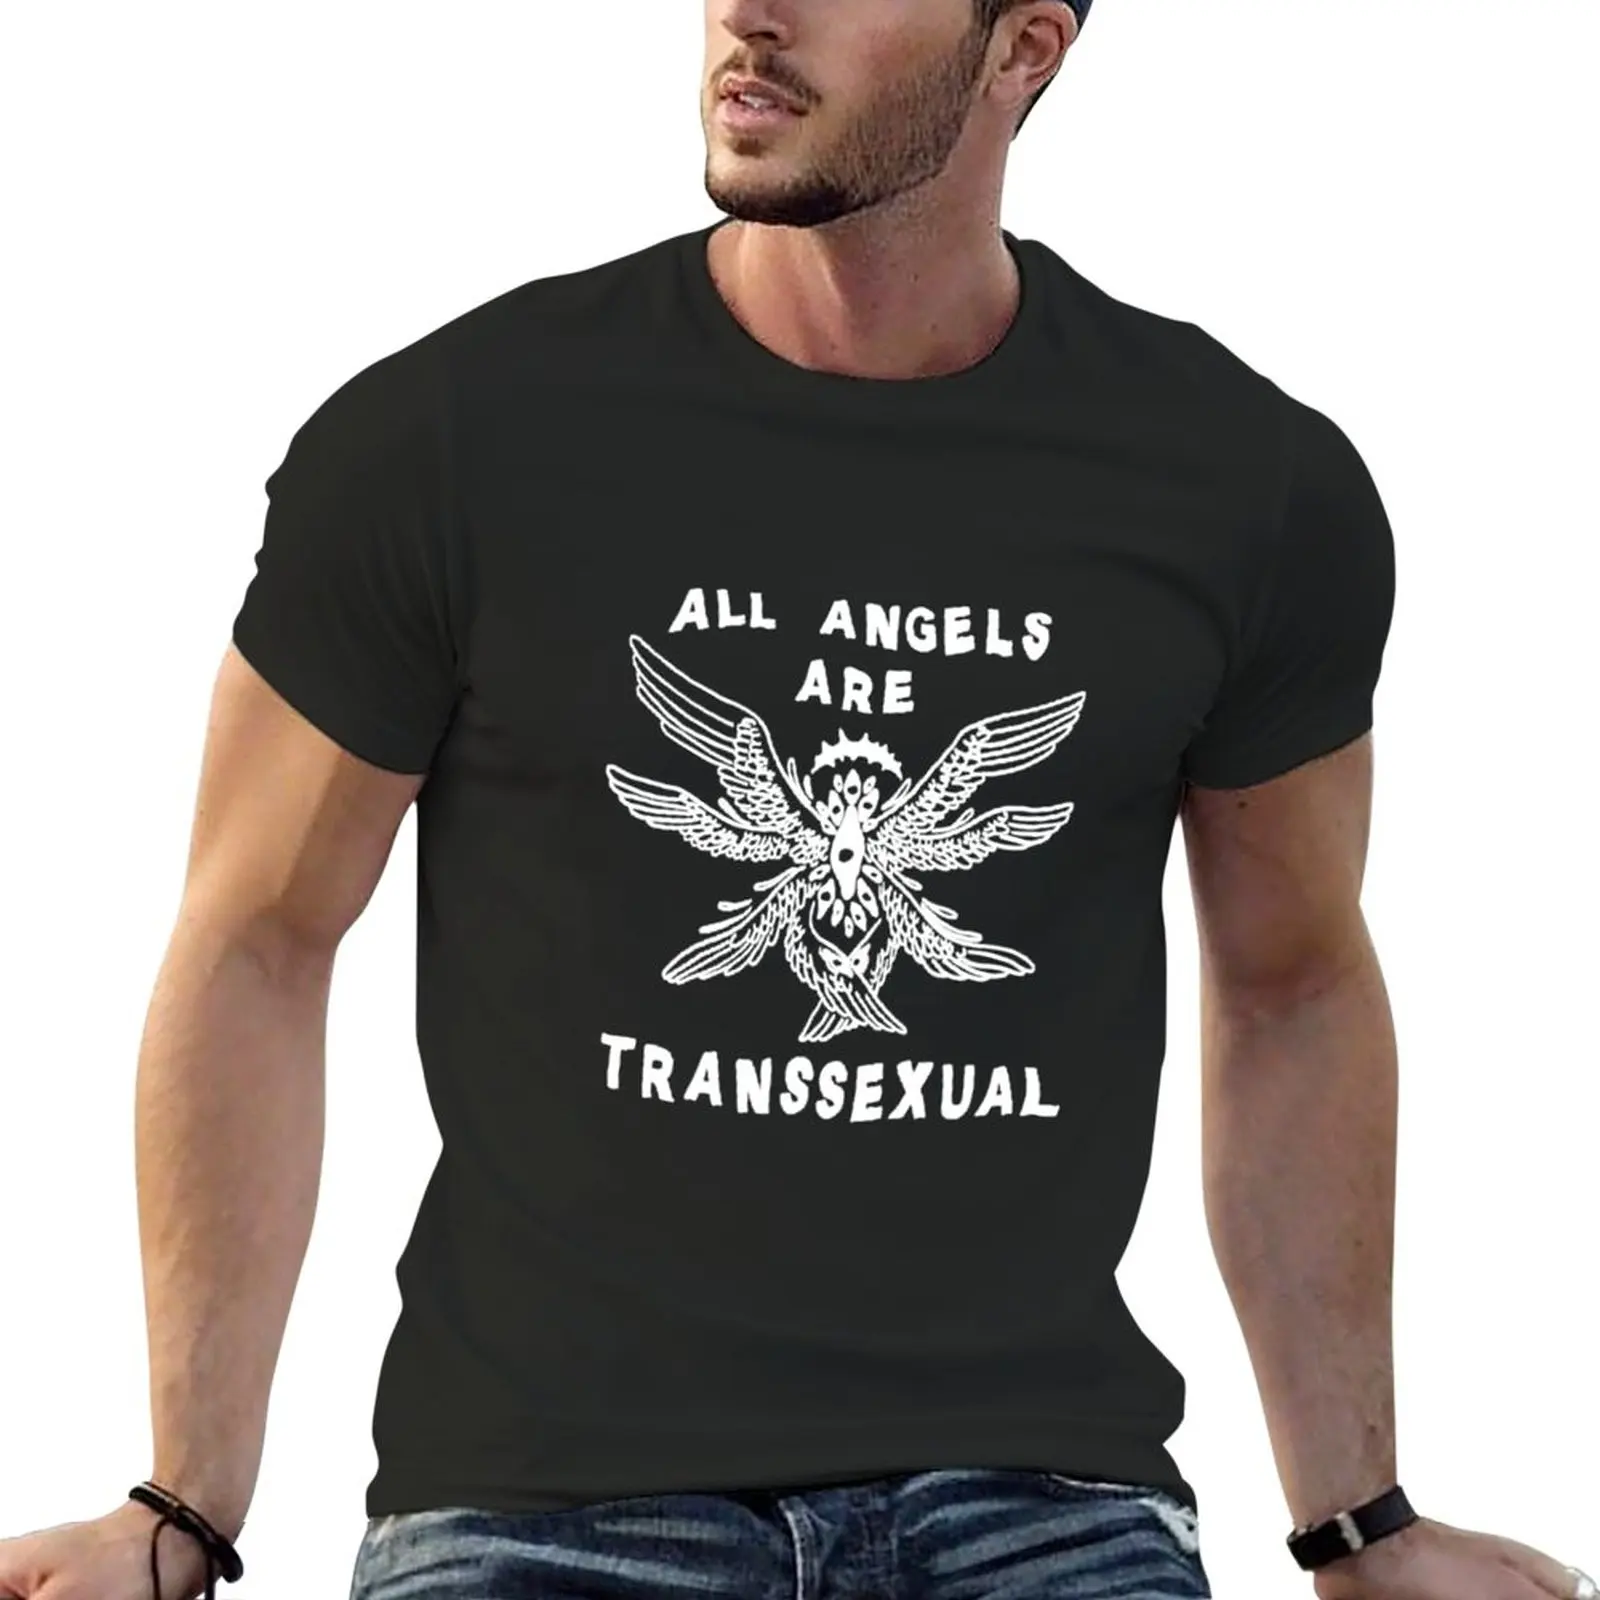 

New All angels are transsexual (inverted) T-Shirt Short t-shirt Short sleeve tee boys t shirts oversized t shirt men